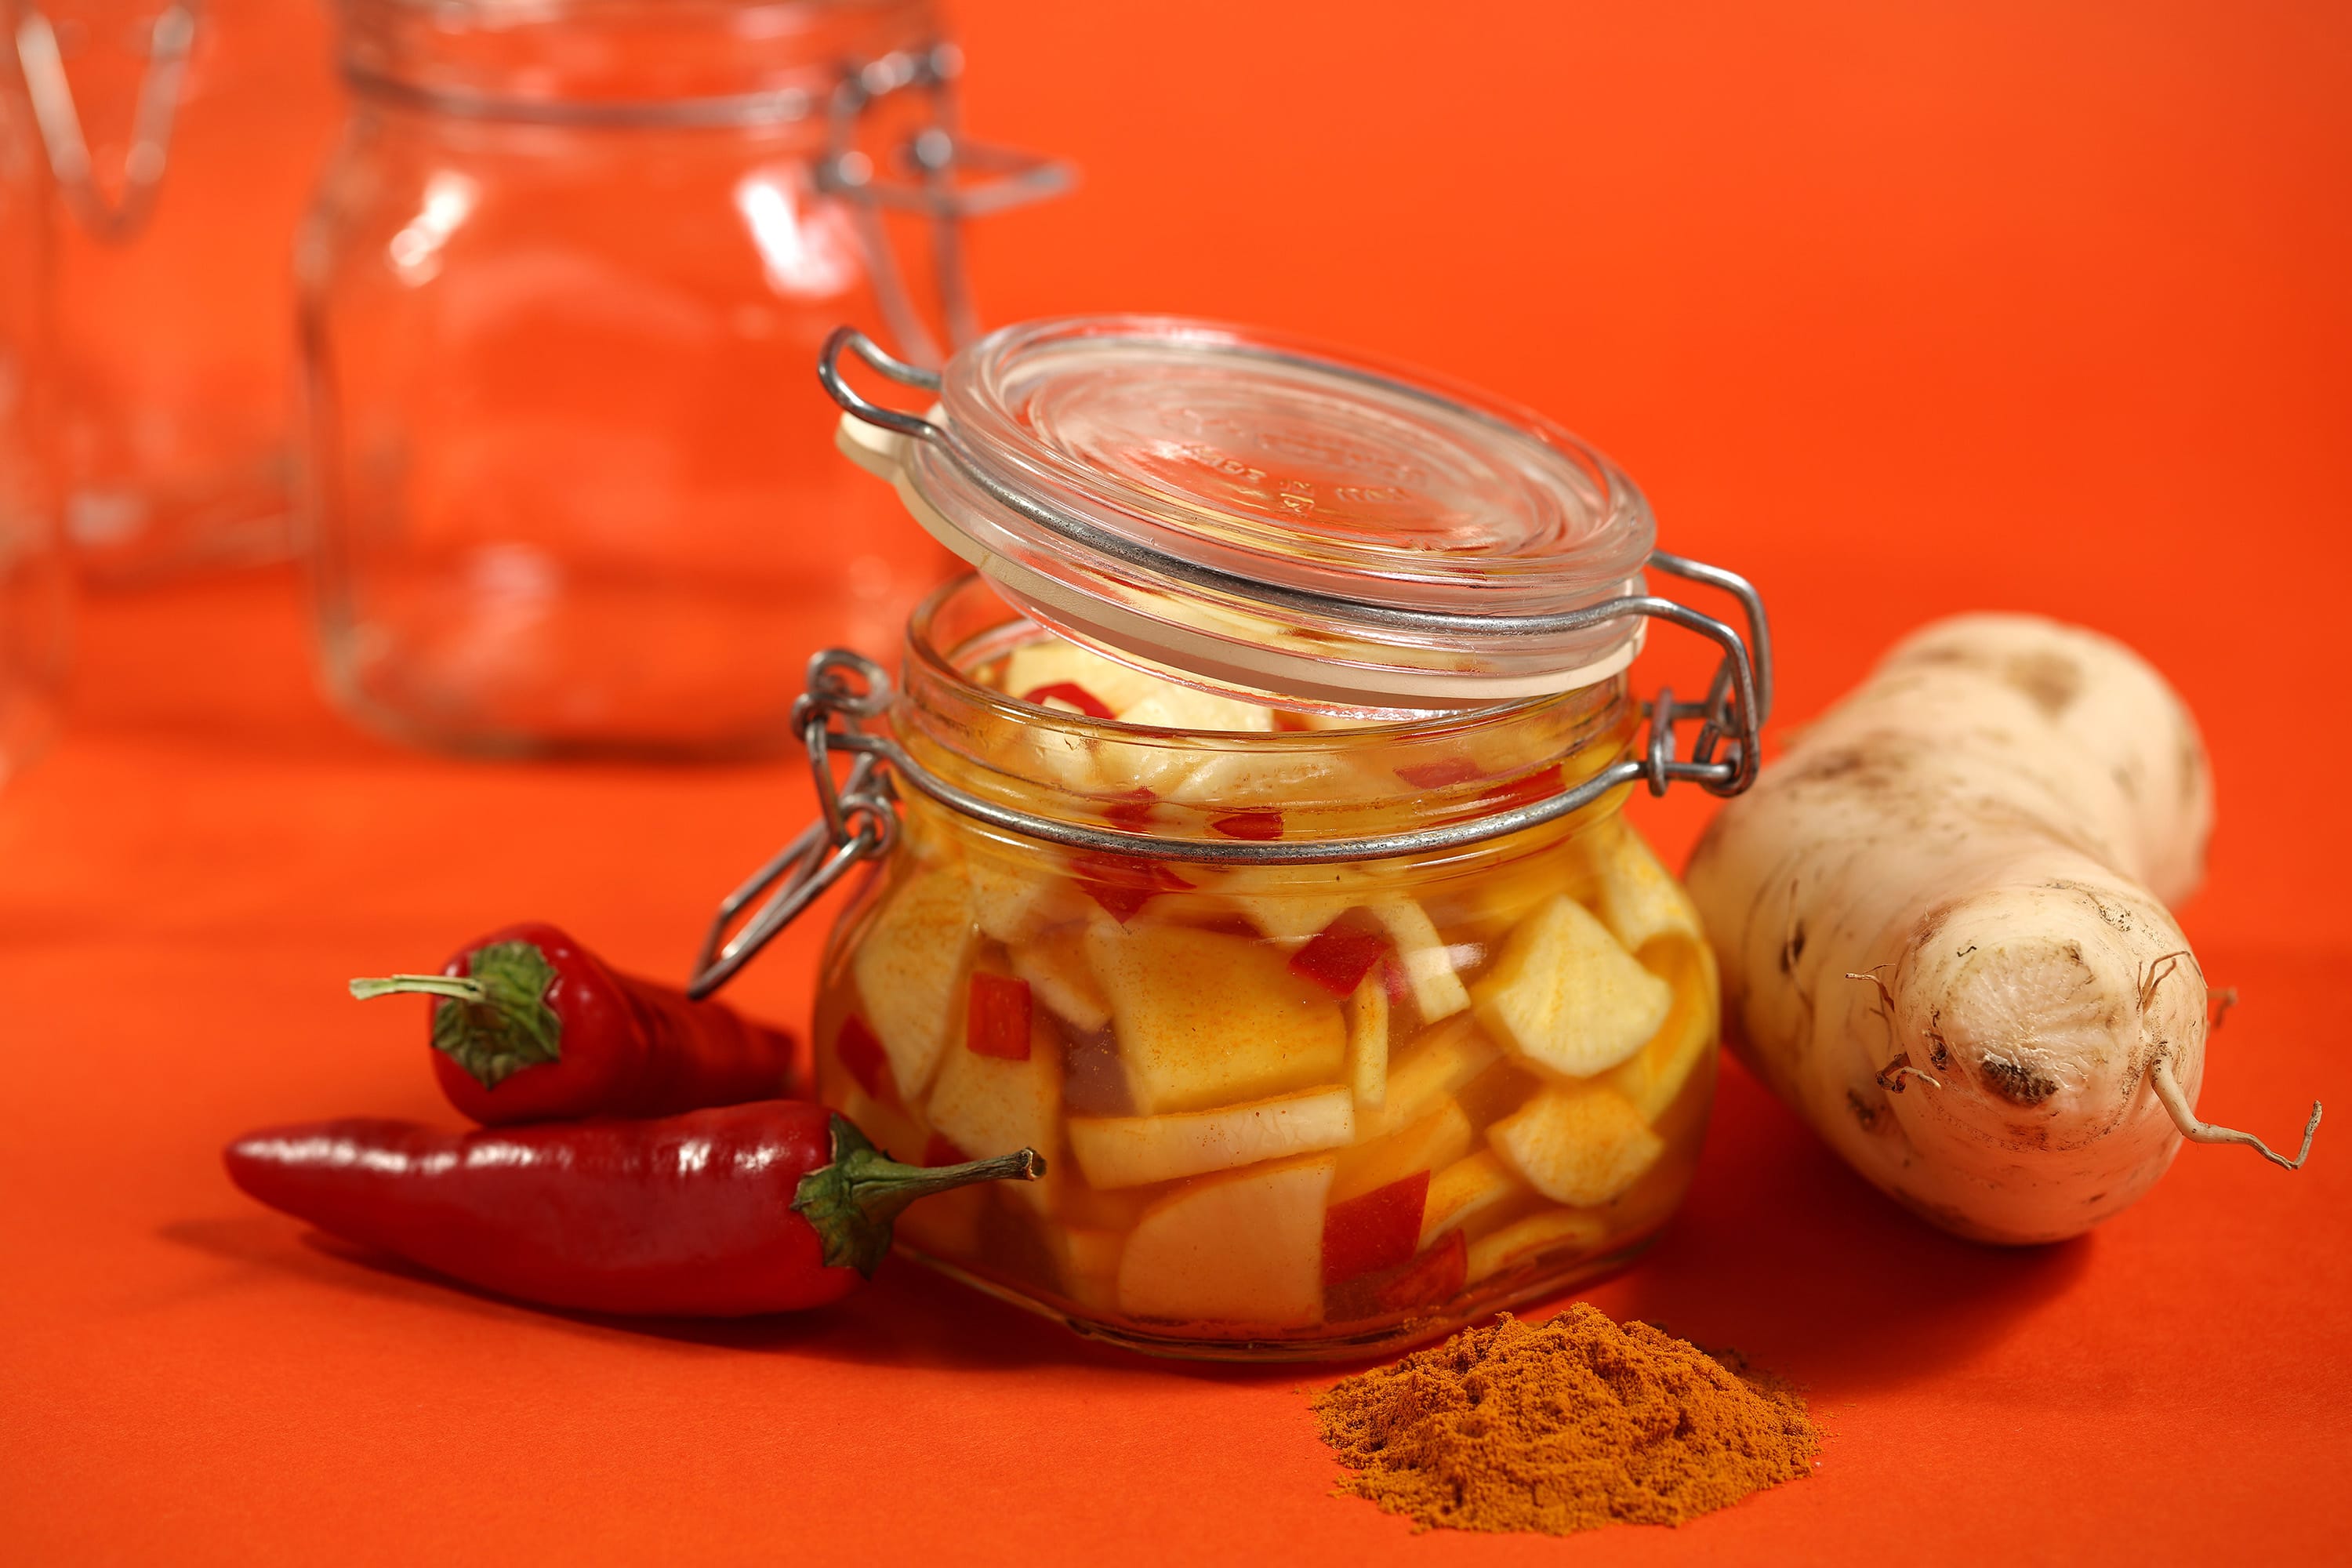 Cookbook author Marlena Spieler likes to have a pickle on the table for the holiday. This pickled daikon with hot peppers has a sweet flavor, in keeping with Rosh Hashana traditions. (E.